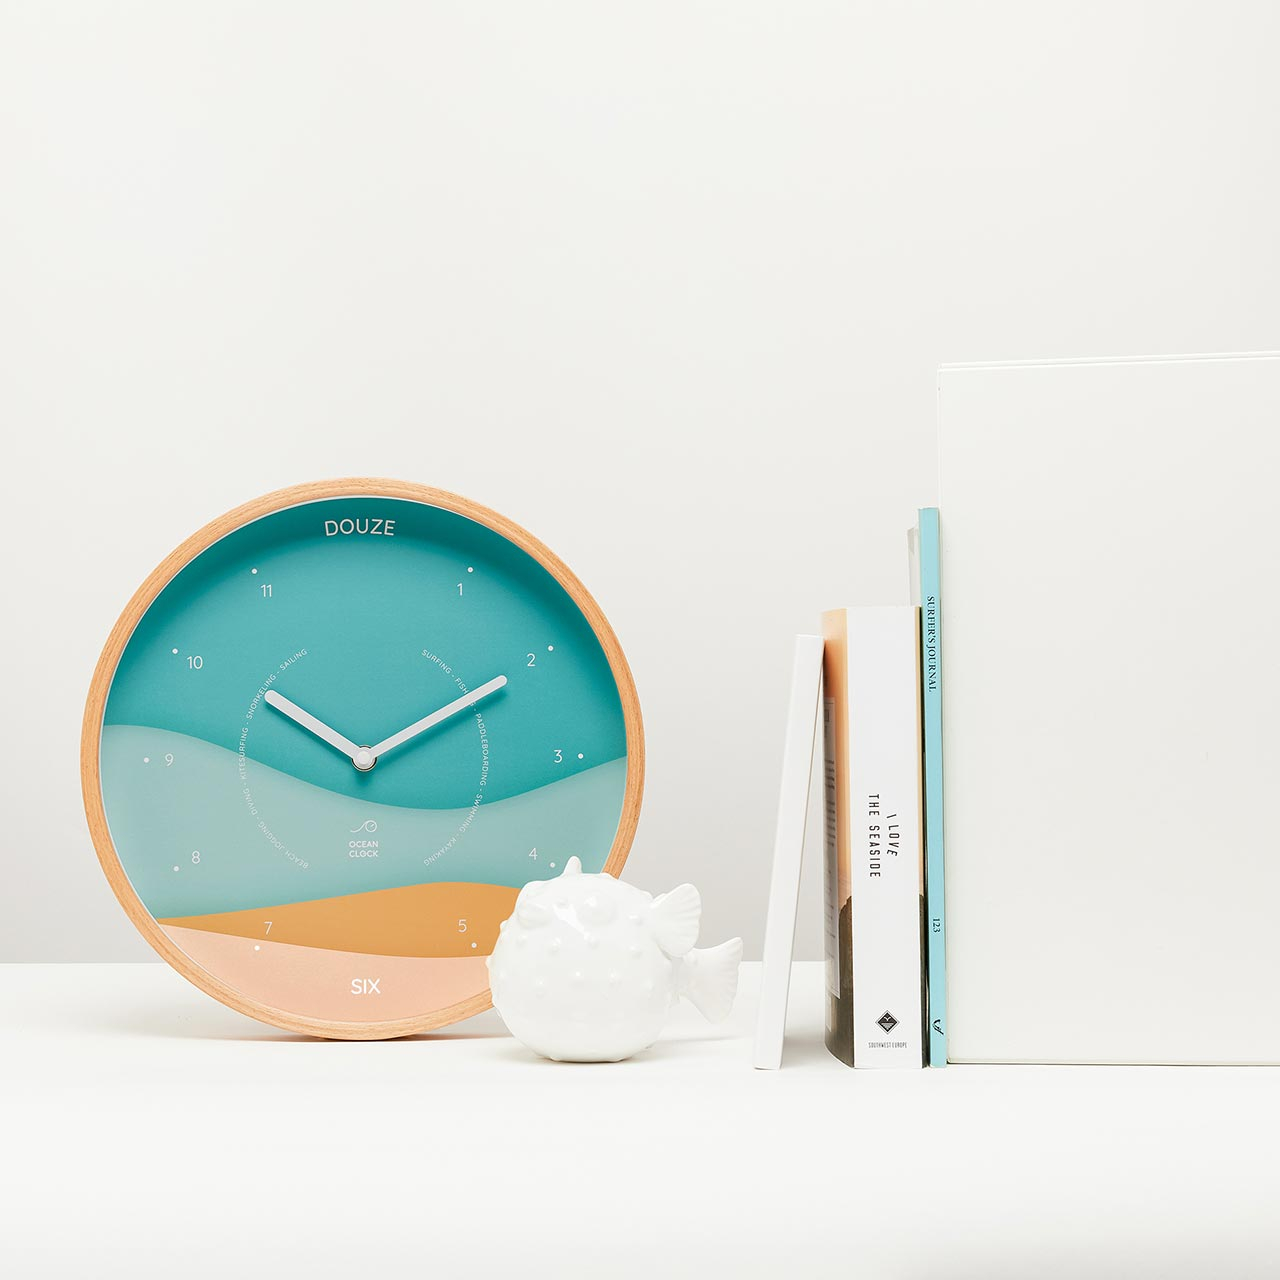 beige and turquoise clock in french next to books and white fish